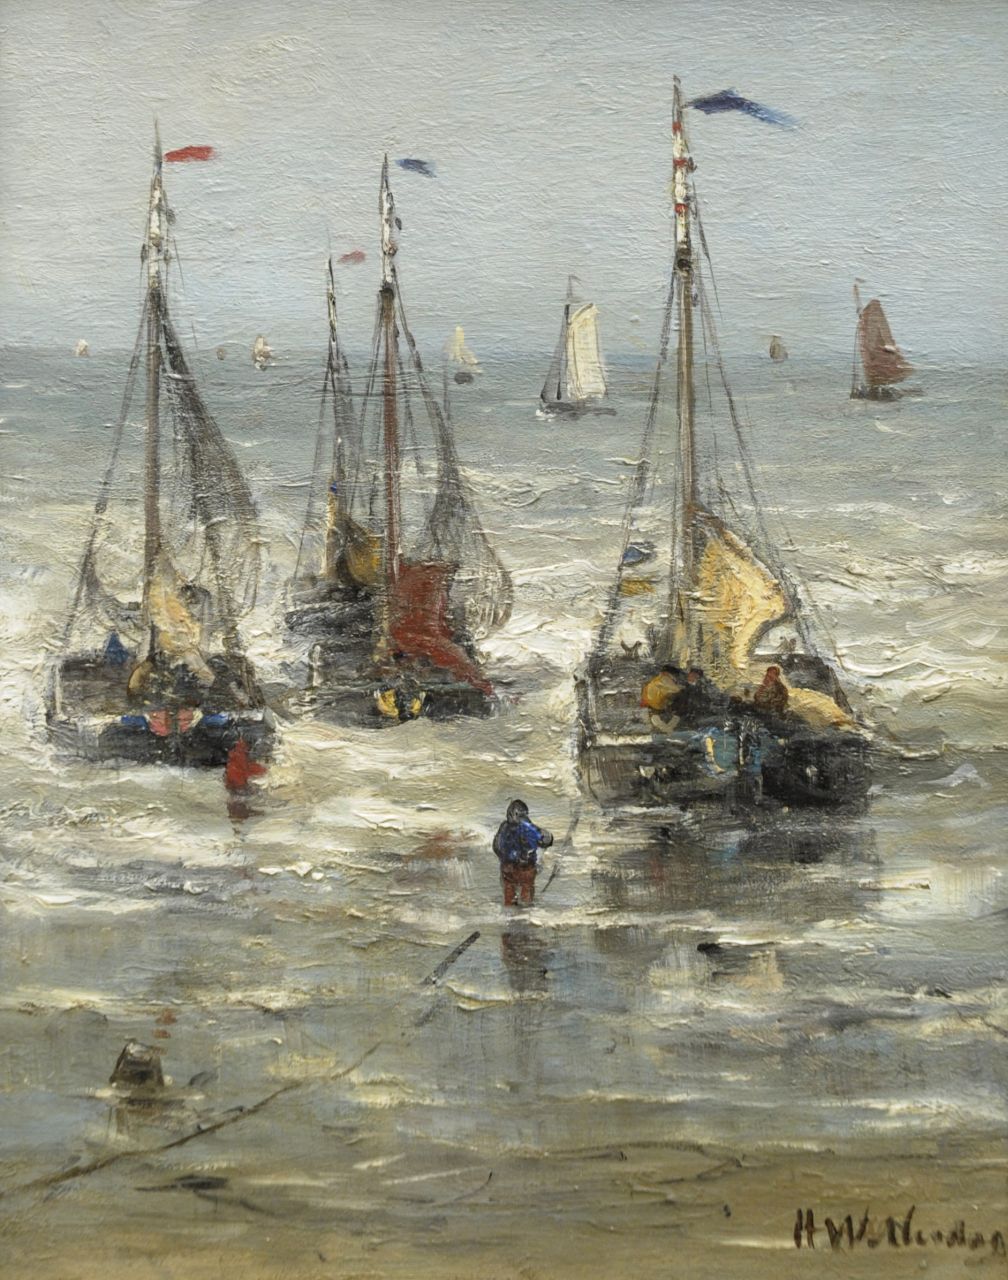 Mesdag H.W.  | Hendrik Willem Mesdag, Sailing out to sea, Öl auf Holz 30,0 x 24,8 cm, signed l.r.